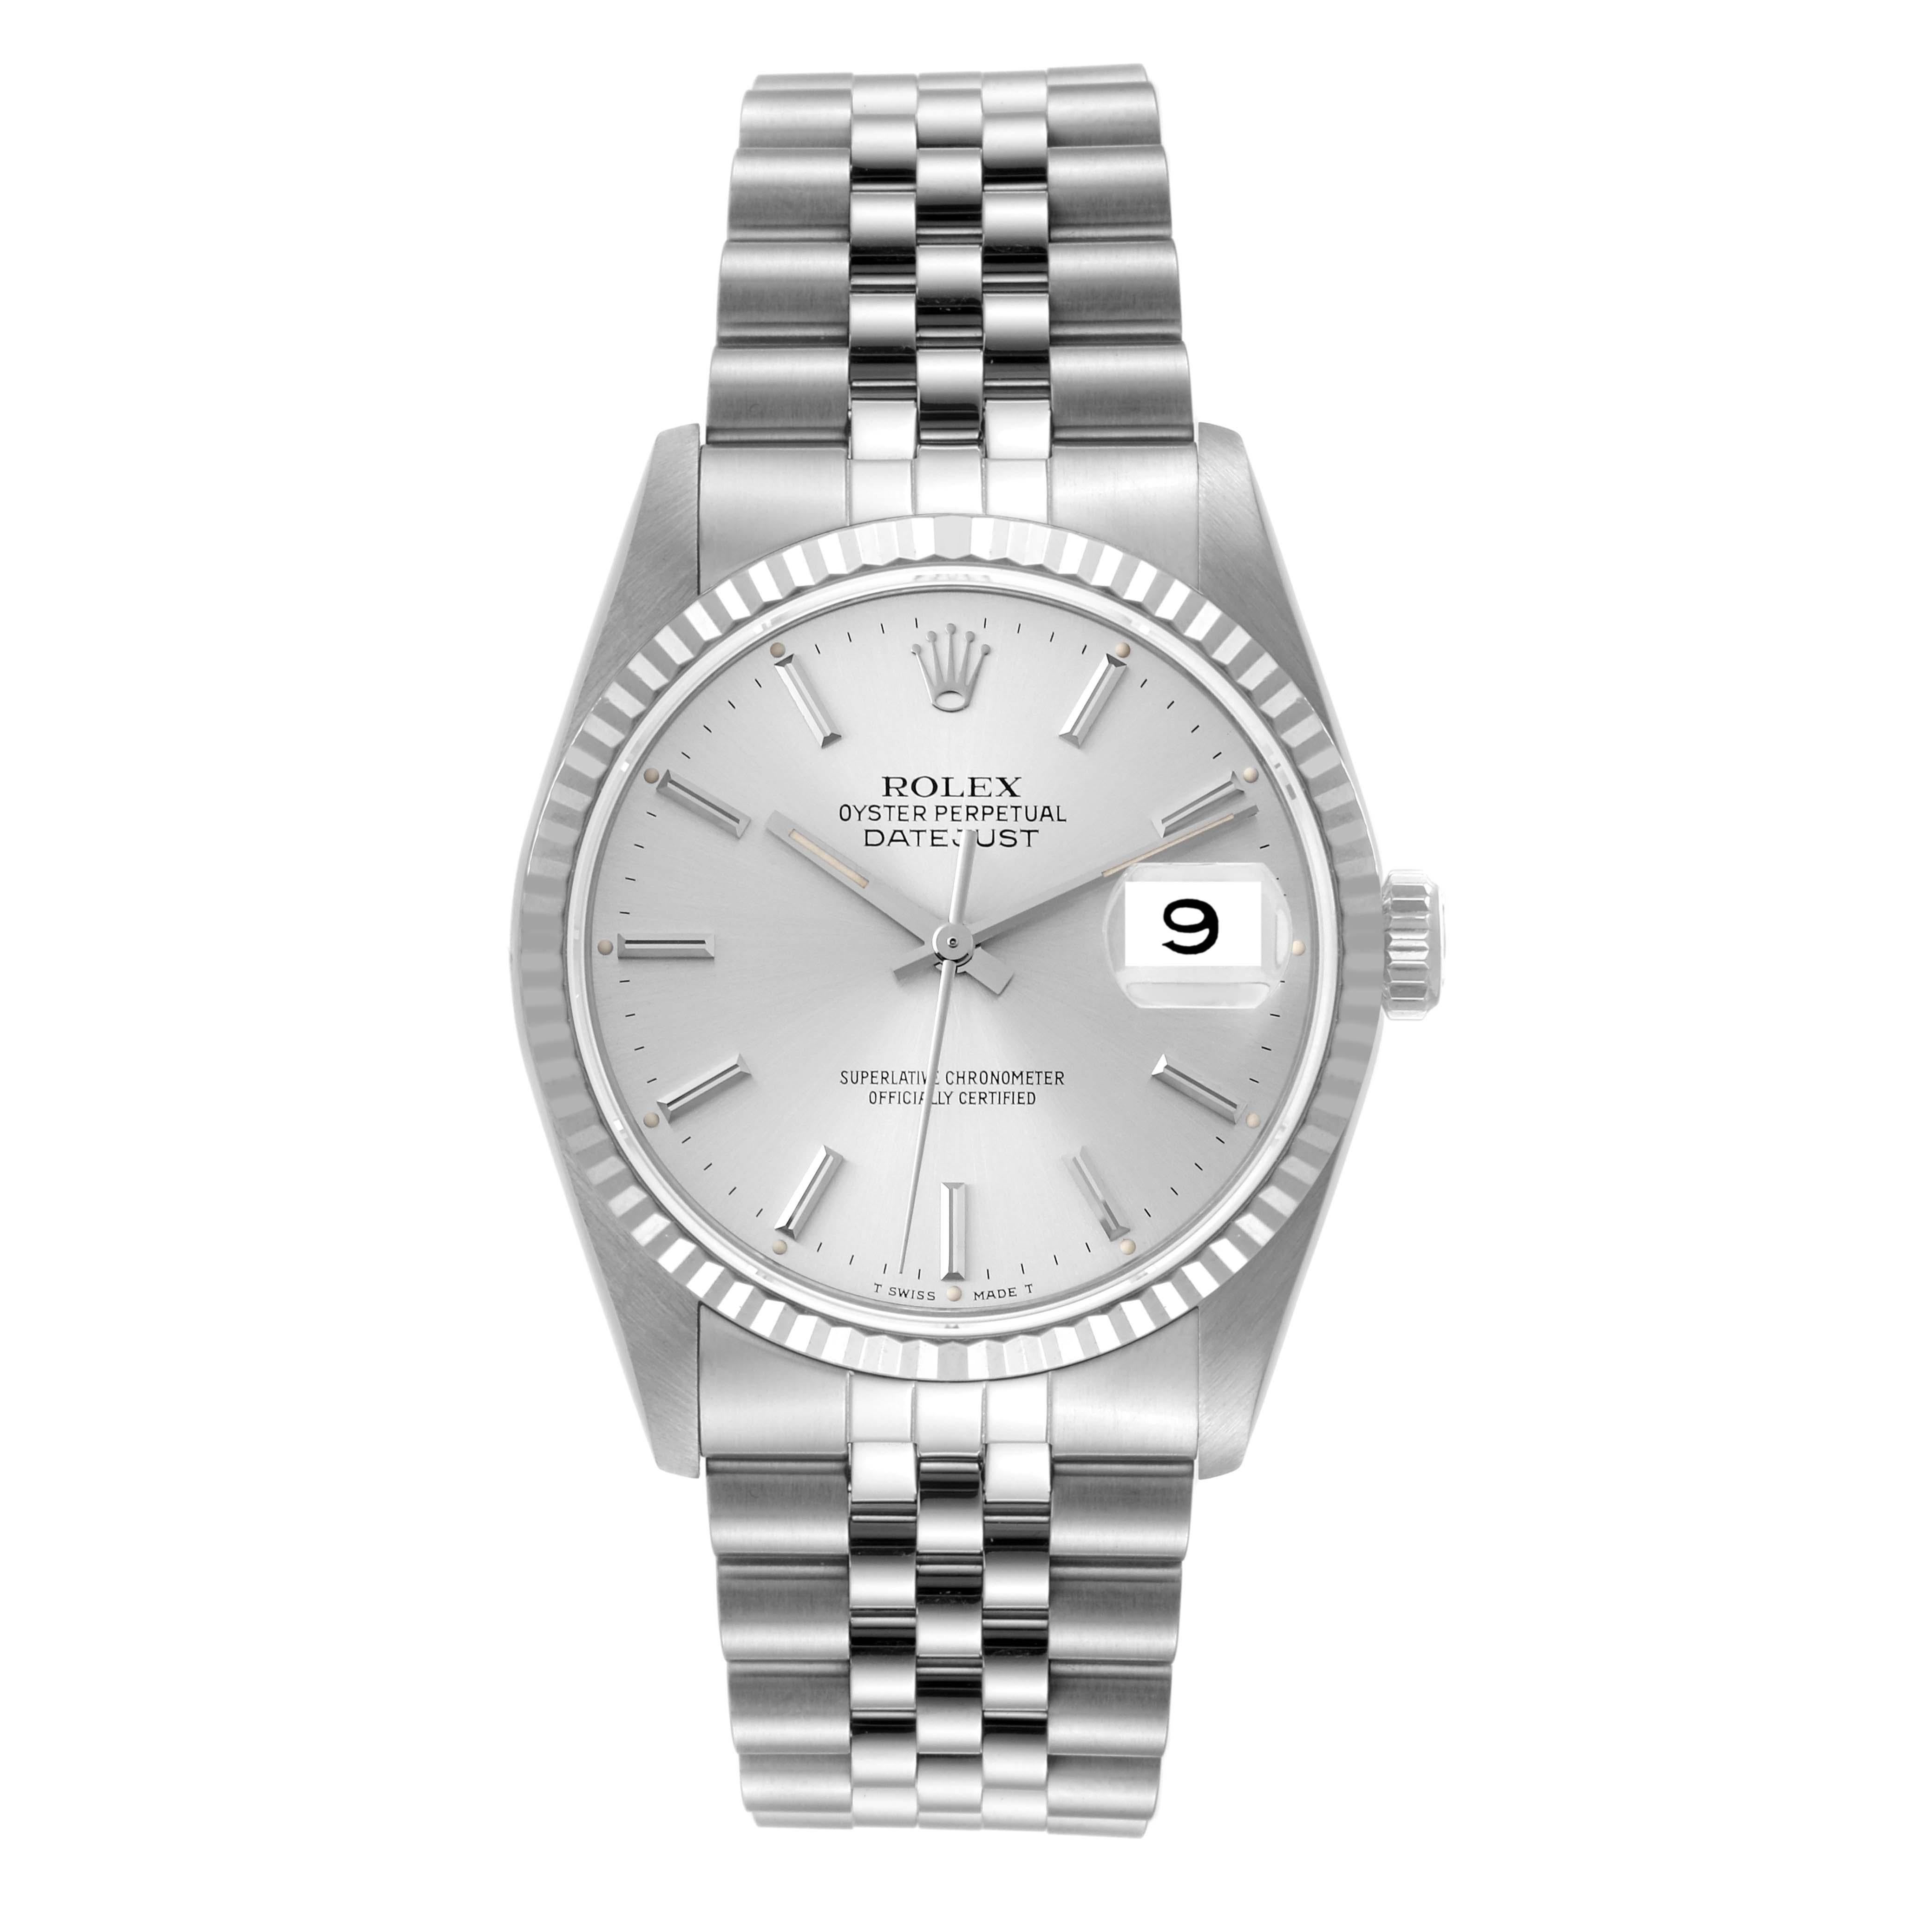 Rolex Datejust Steel White Gold Silver Dial Mens Watch 16234. Officially certified chronometer automatic self-winding movement. Stainless steel oyster case 36 mm in diameter. Rolex logo on the crown. 18k white gold fluted bezel. Scratch resistant